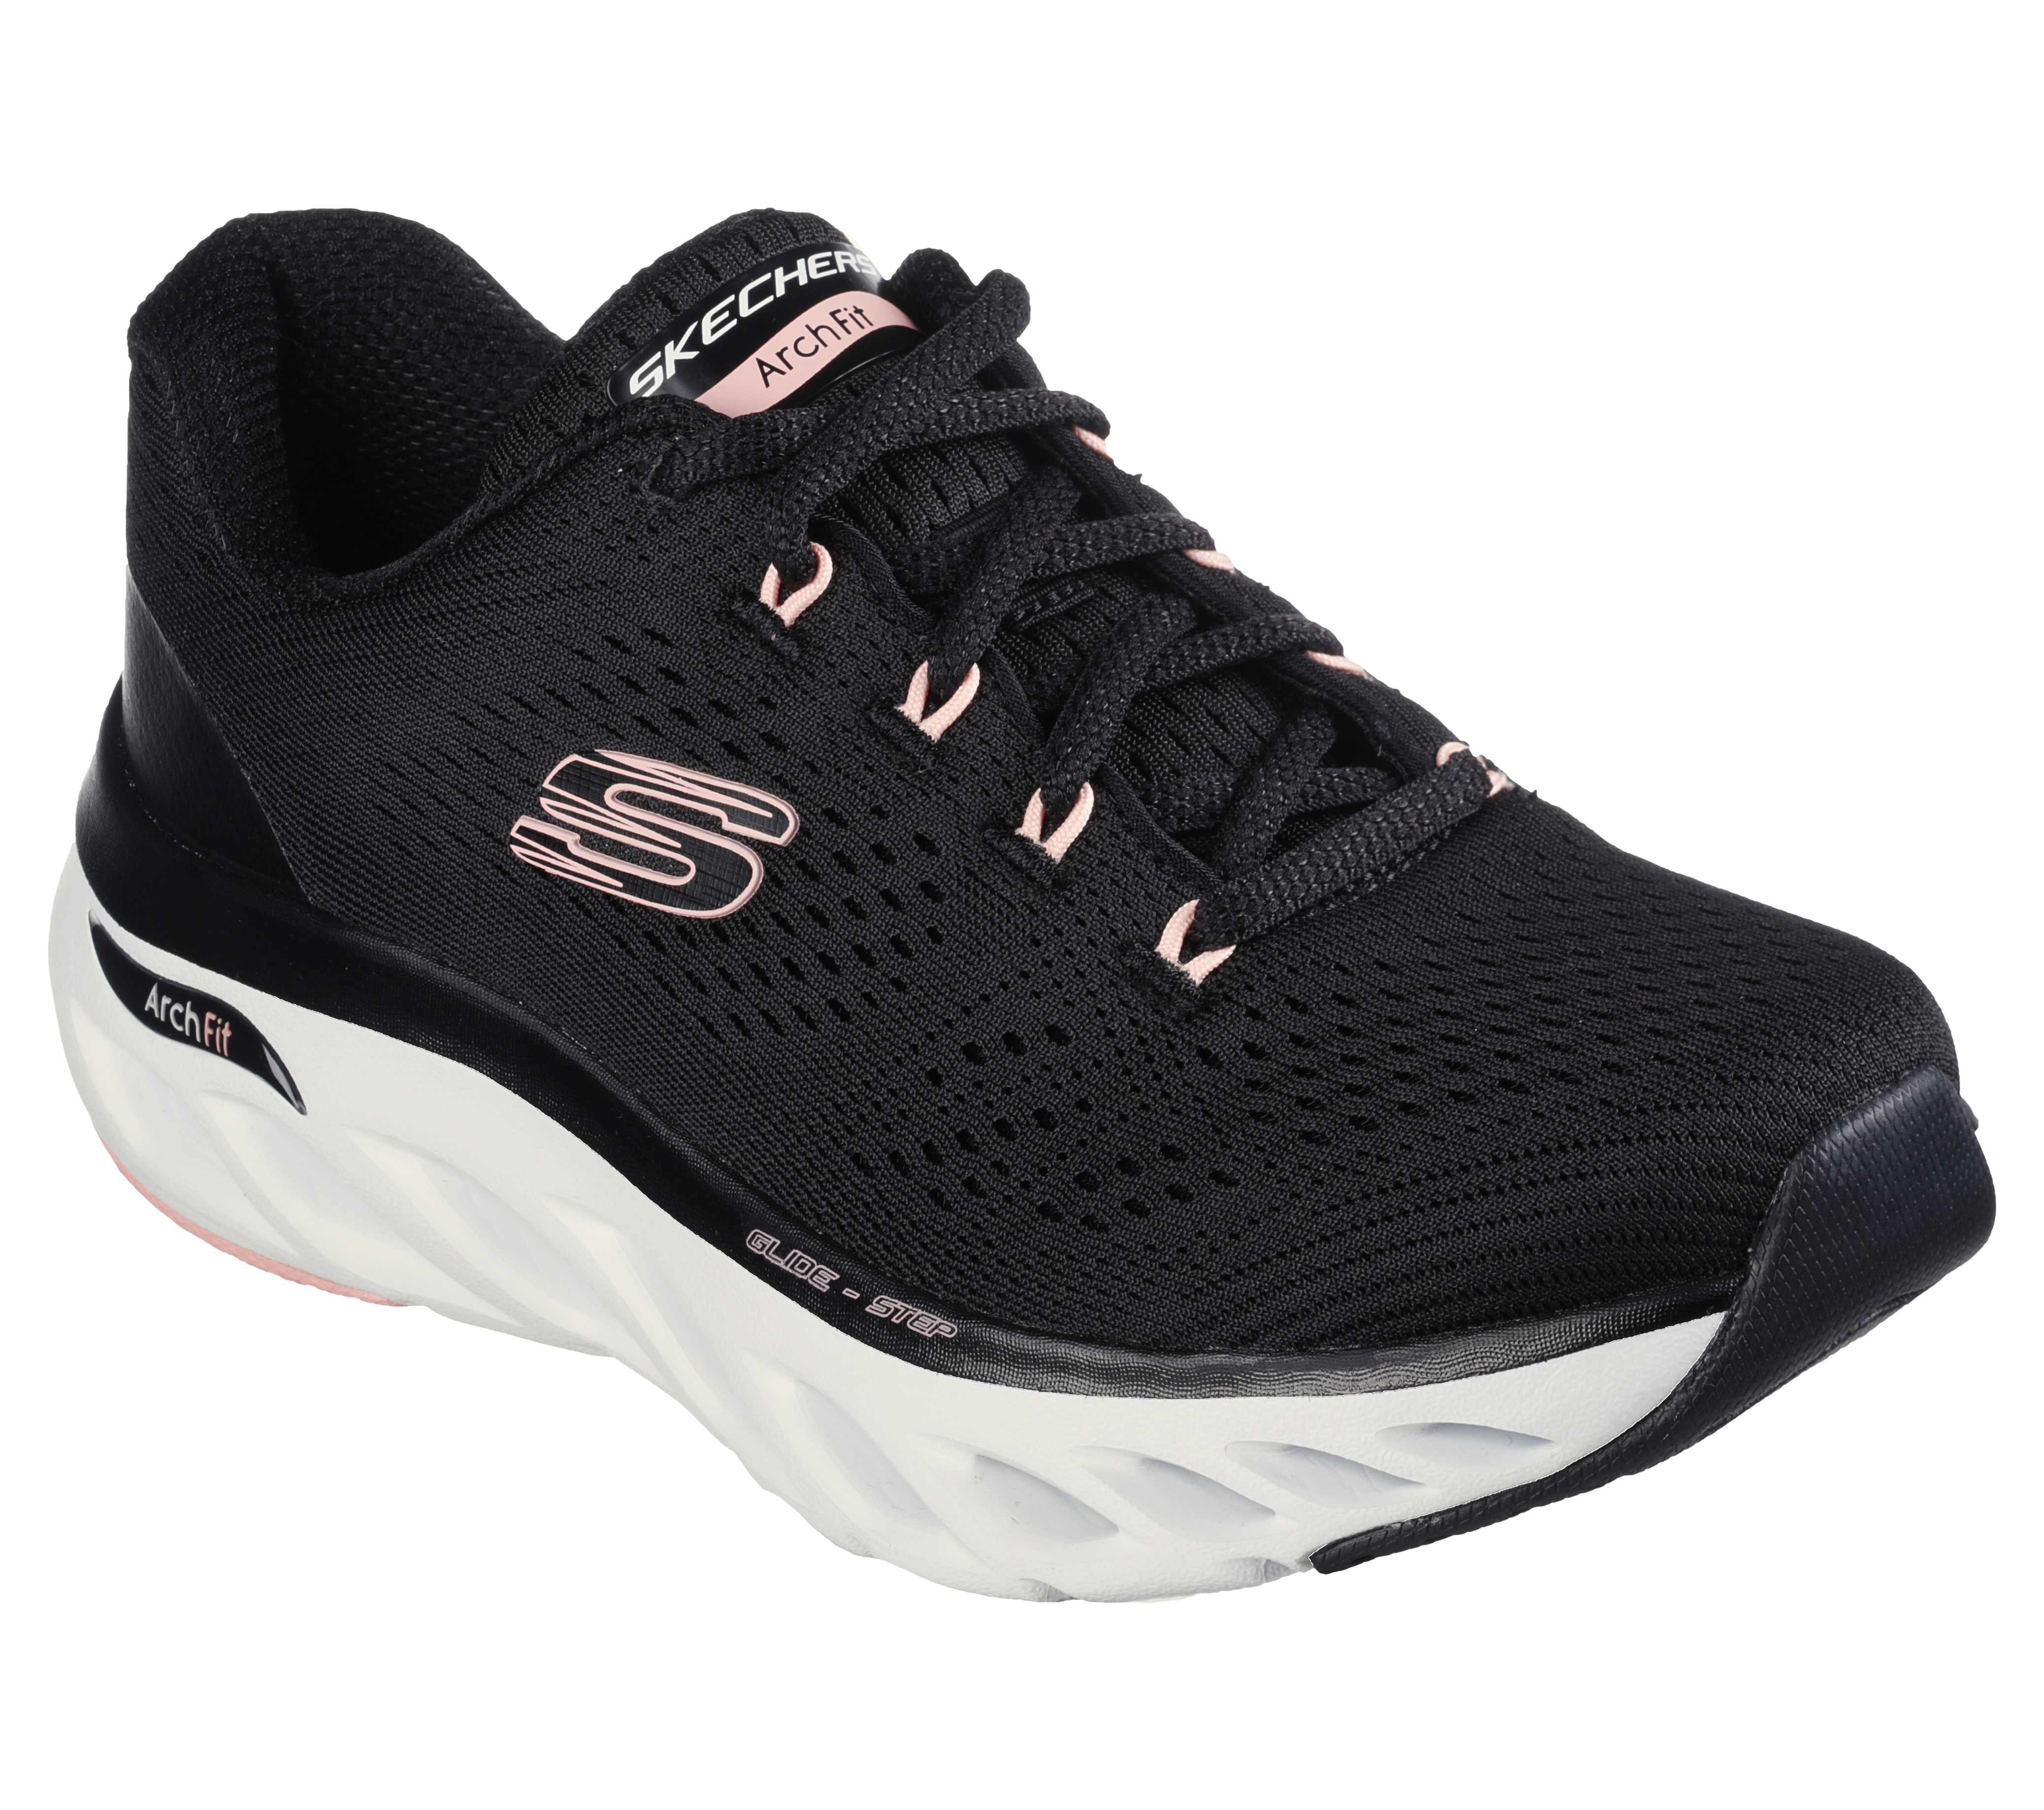 Skechers arch fit glide-step - top glory